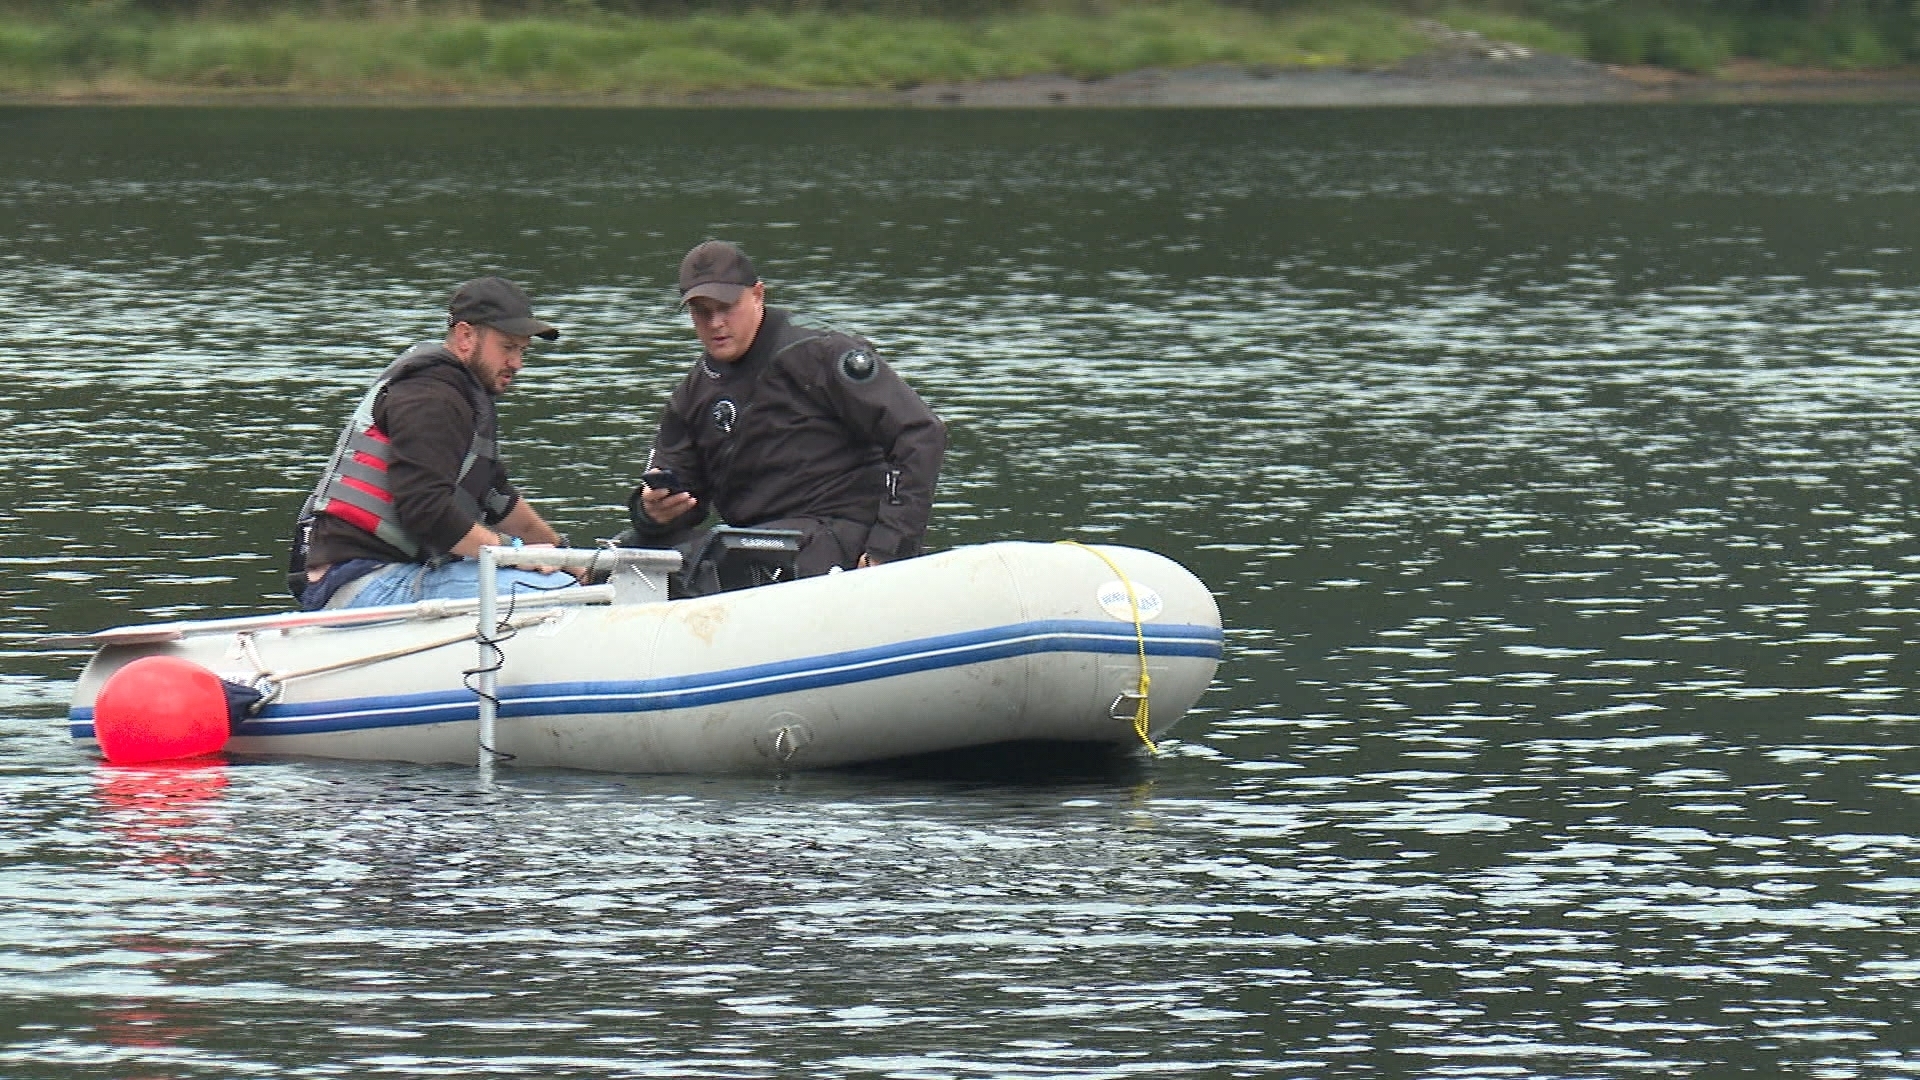 Volunteer divers from Beneath the Surface will spend three weekends searching for Kevin's car.